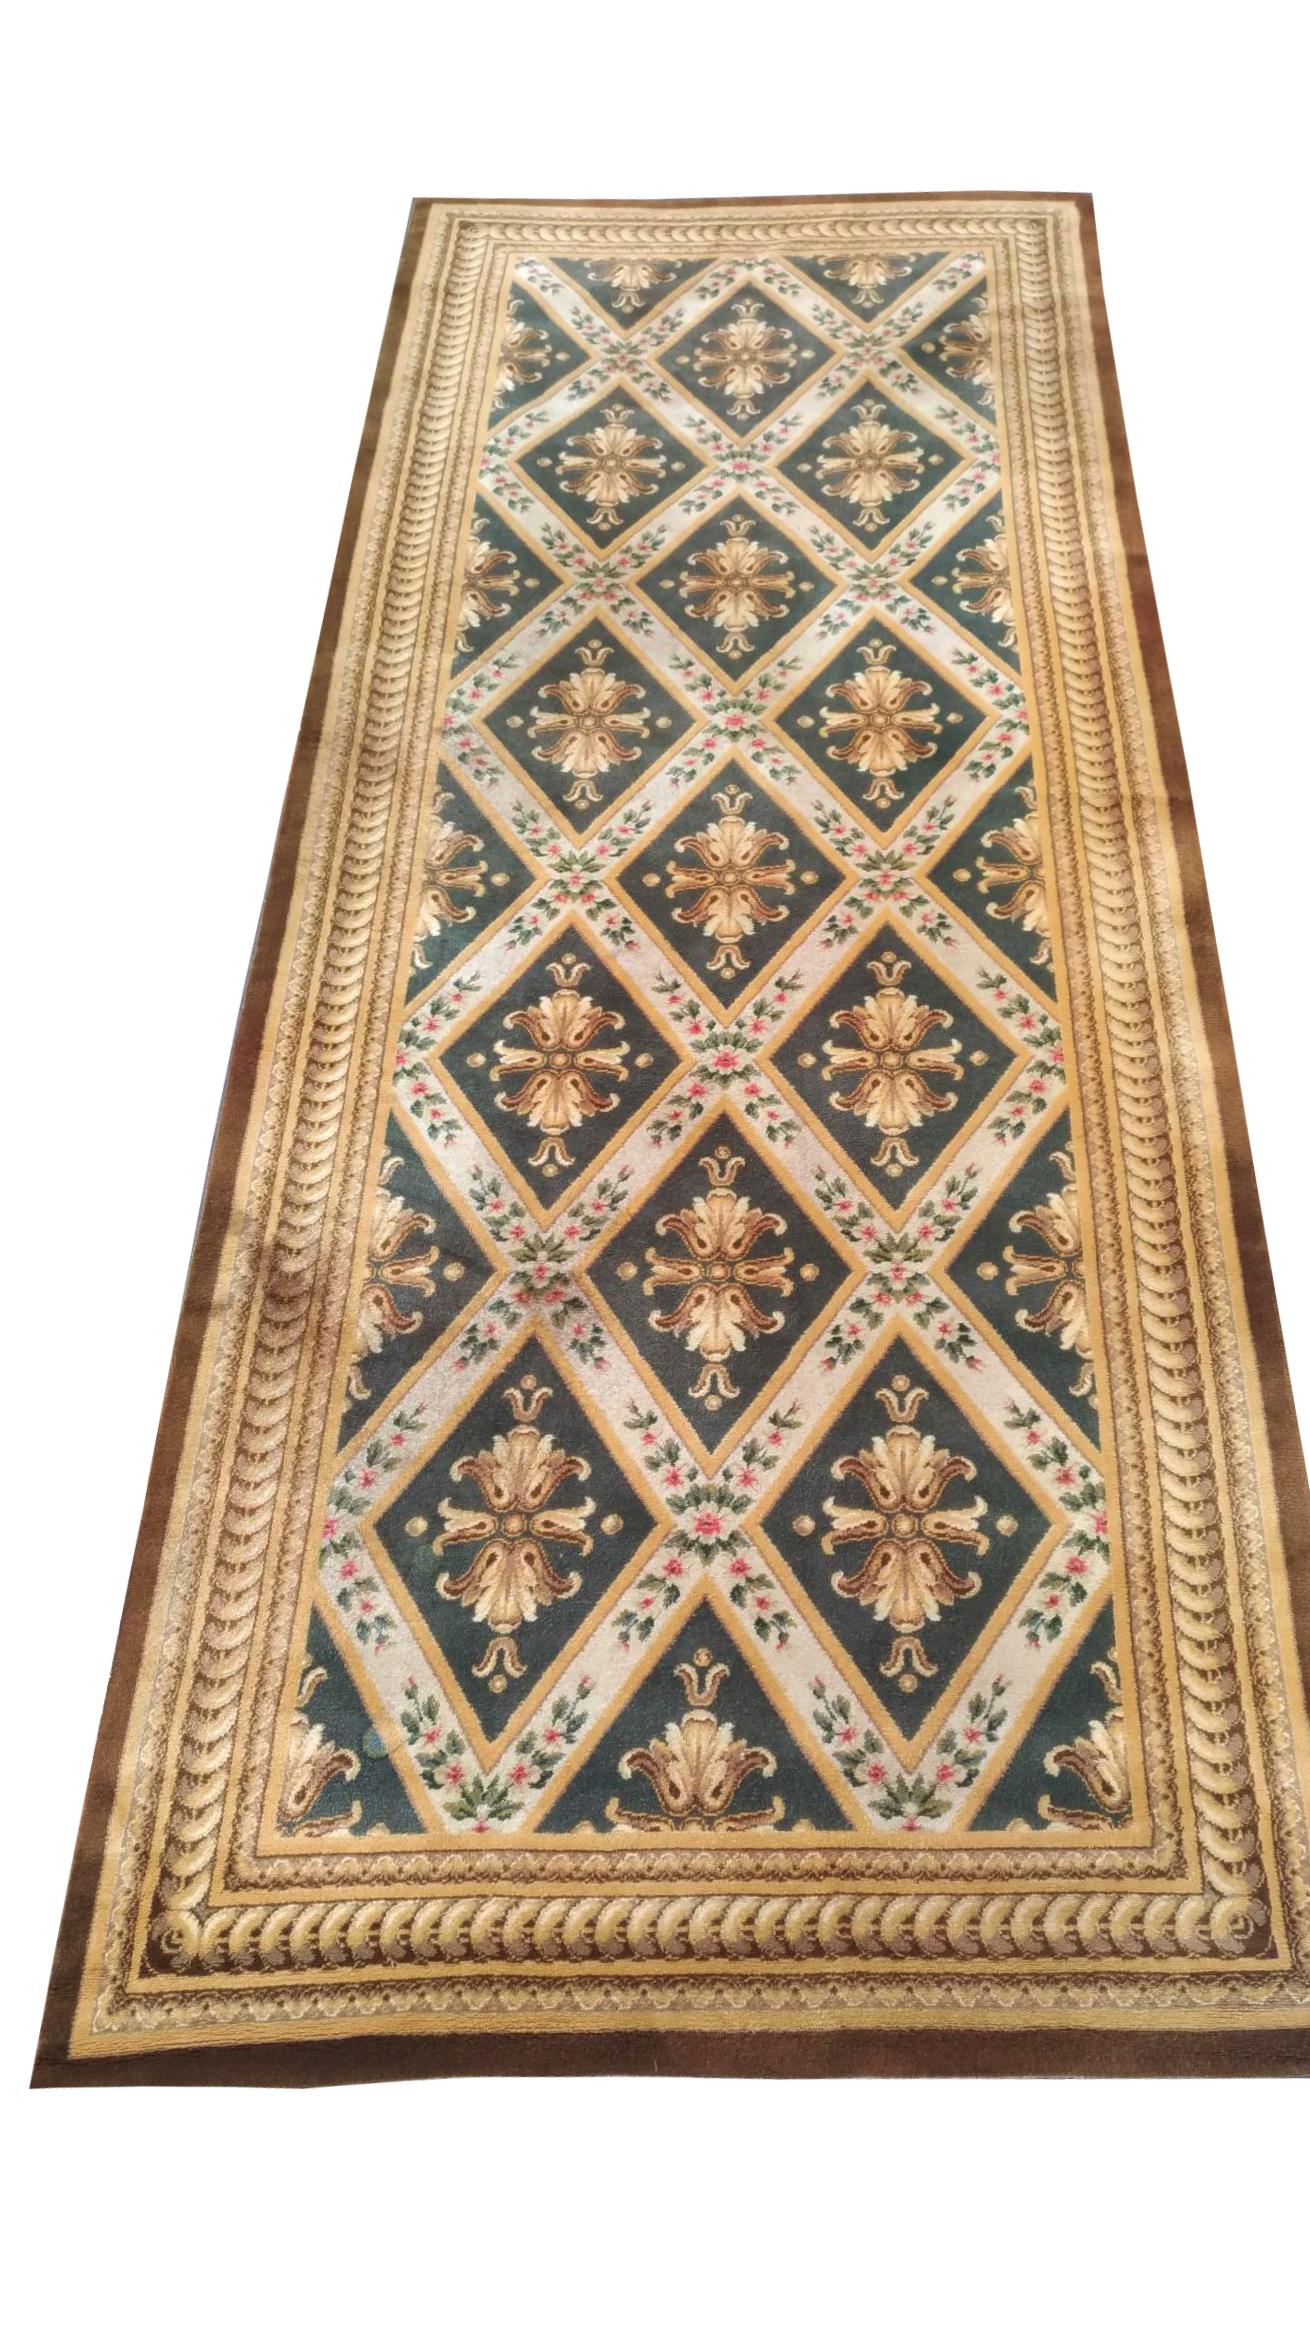 1043 - Beautiful Aubusson rug savonnerie with pretty patterns and colors and Savonnerie style, entirely knotted in wool velvet on a cotton background.